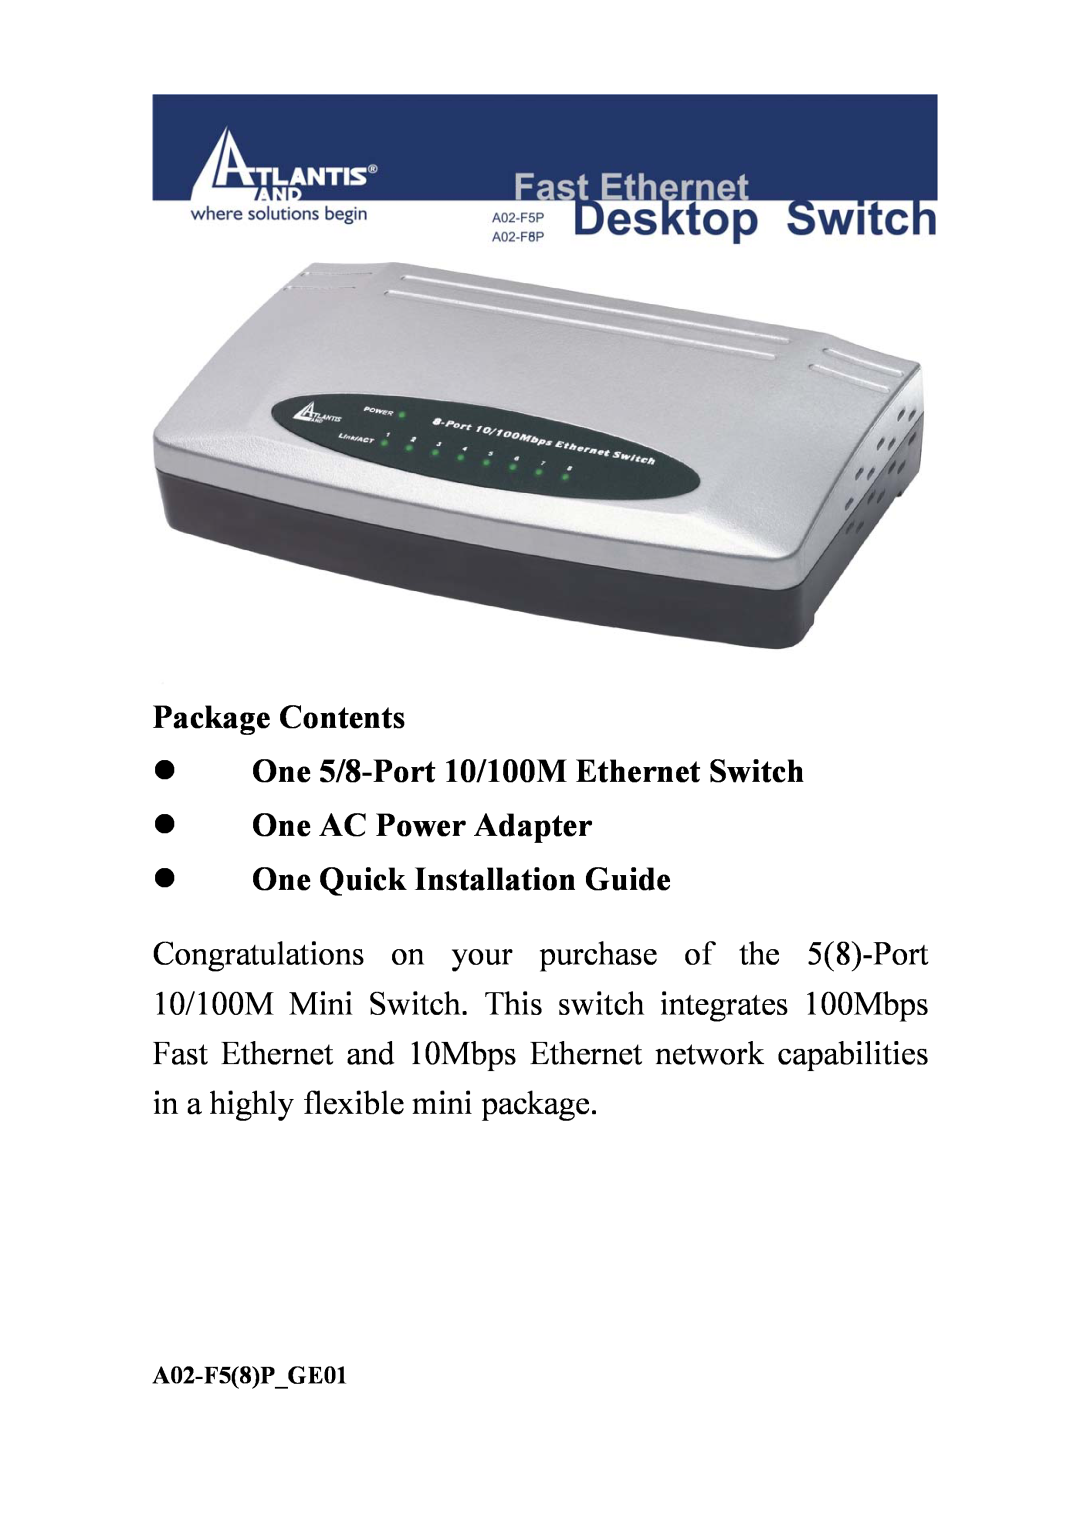 Atlantis Land AO2-F5P manual Package Contents One 5/8-Port 10/100M Ethernet Switch, A02-F58PGE01 